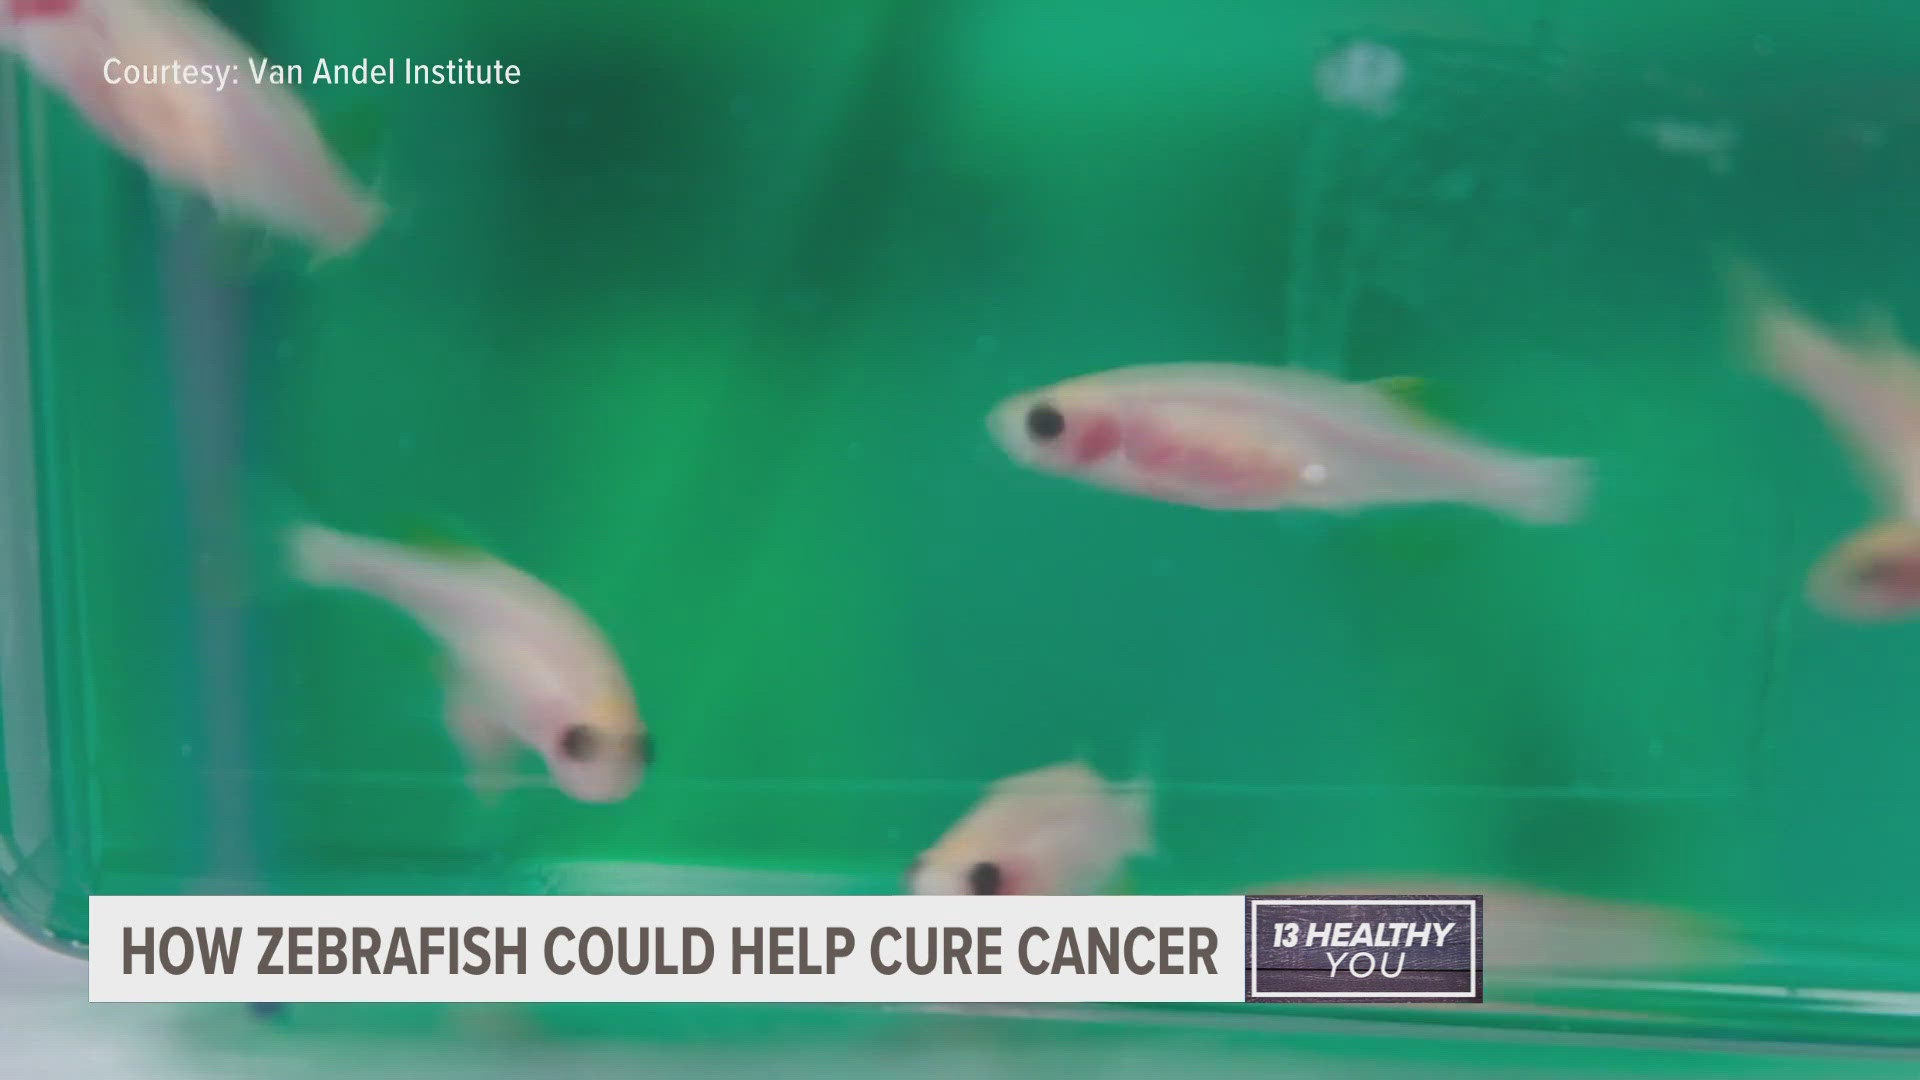 Scientists at the Van Andel Institute are using zebrafish to help develop stem cells for cancer research.